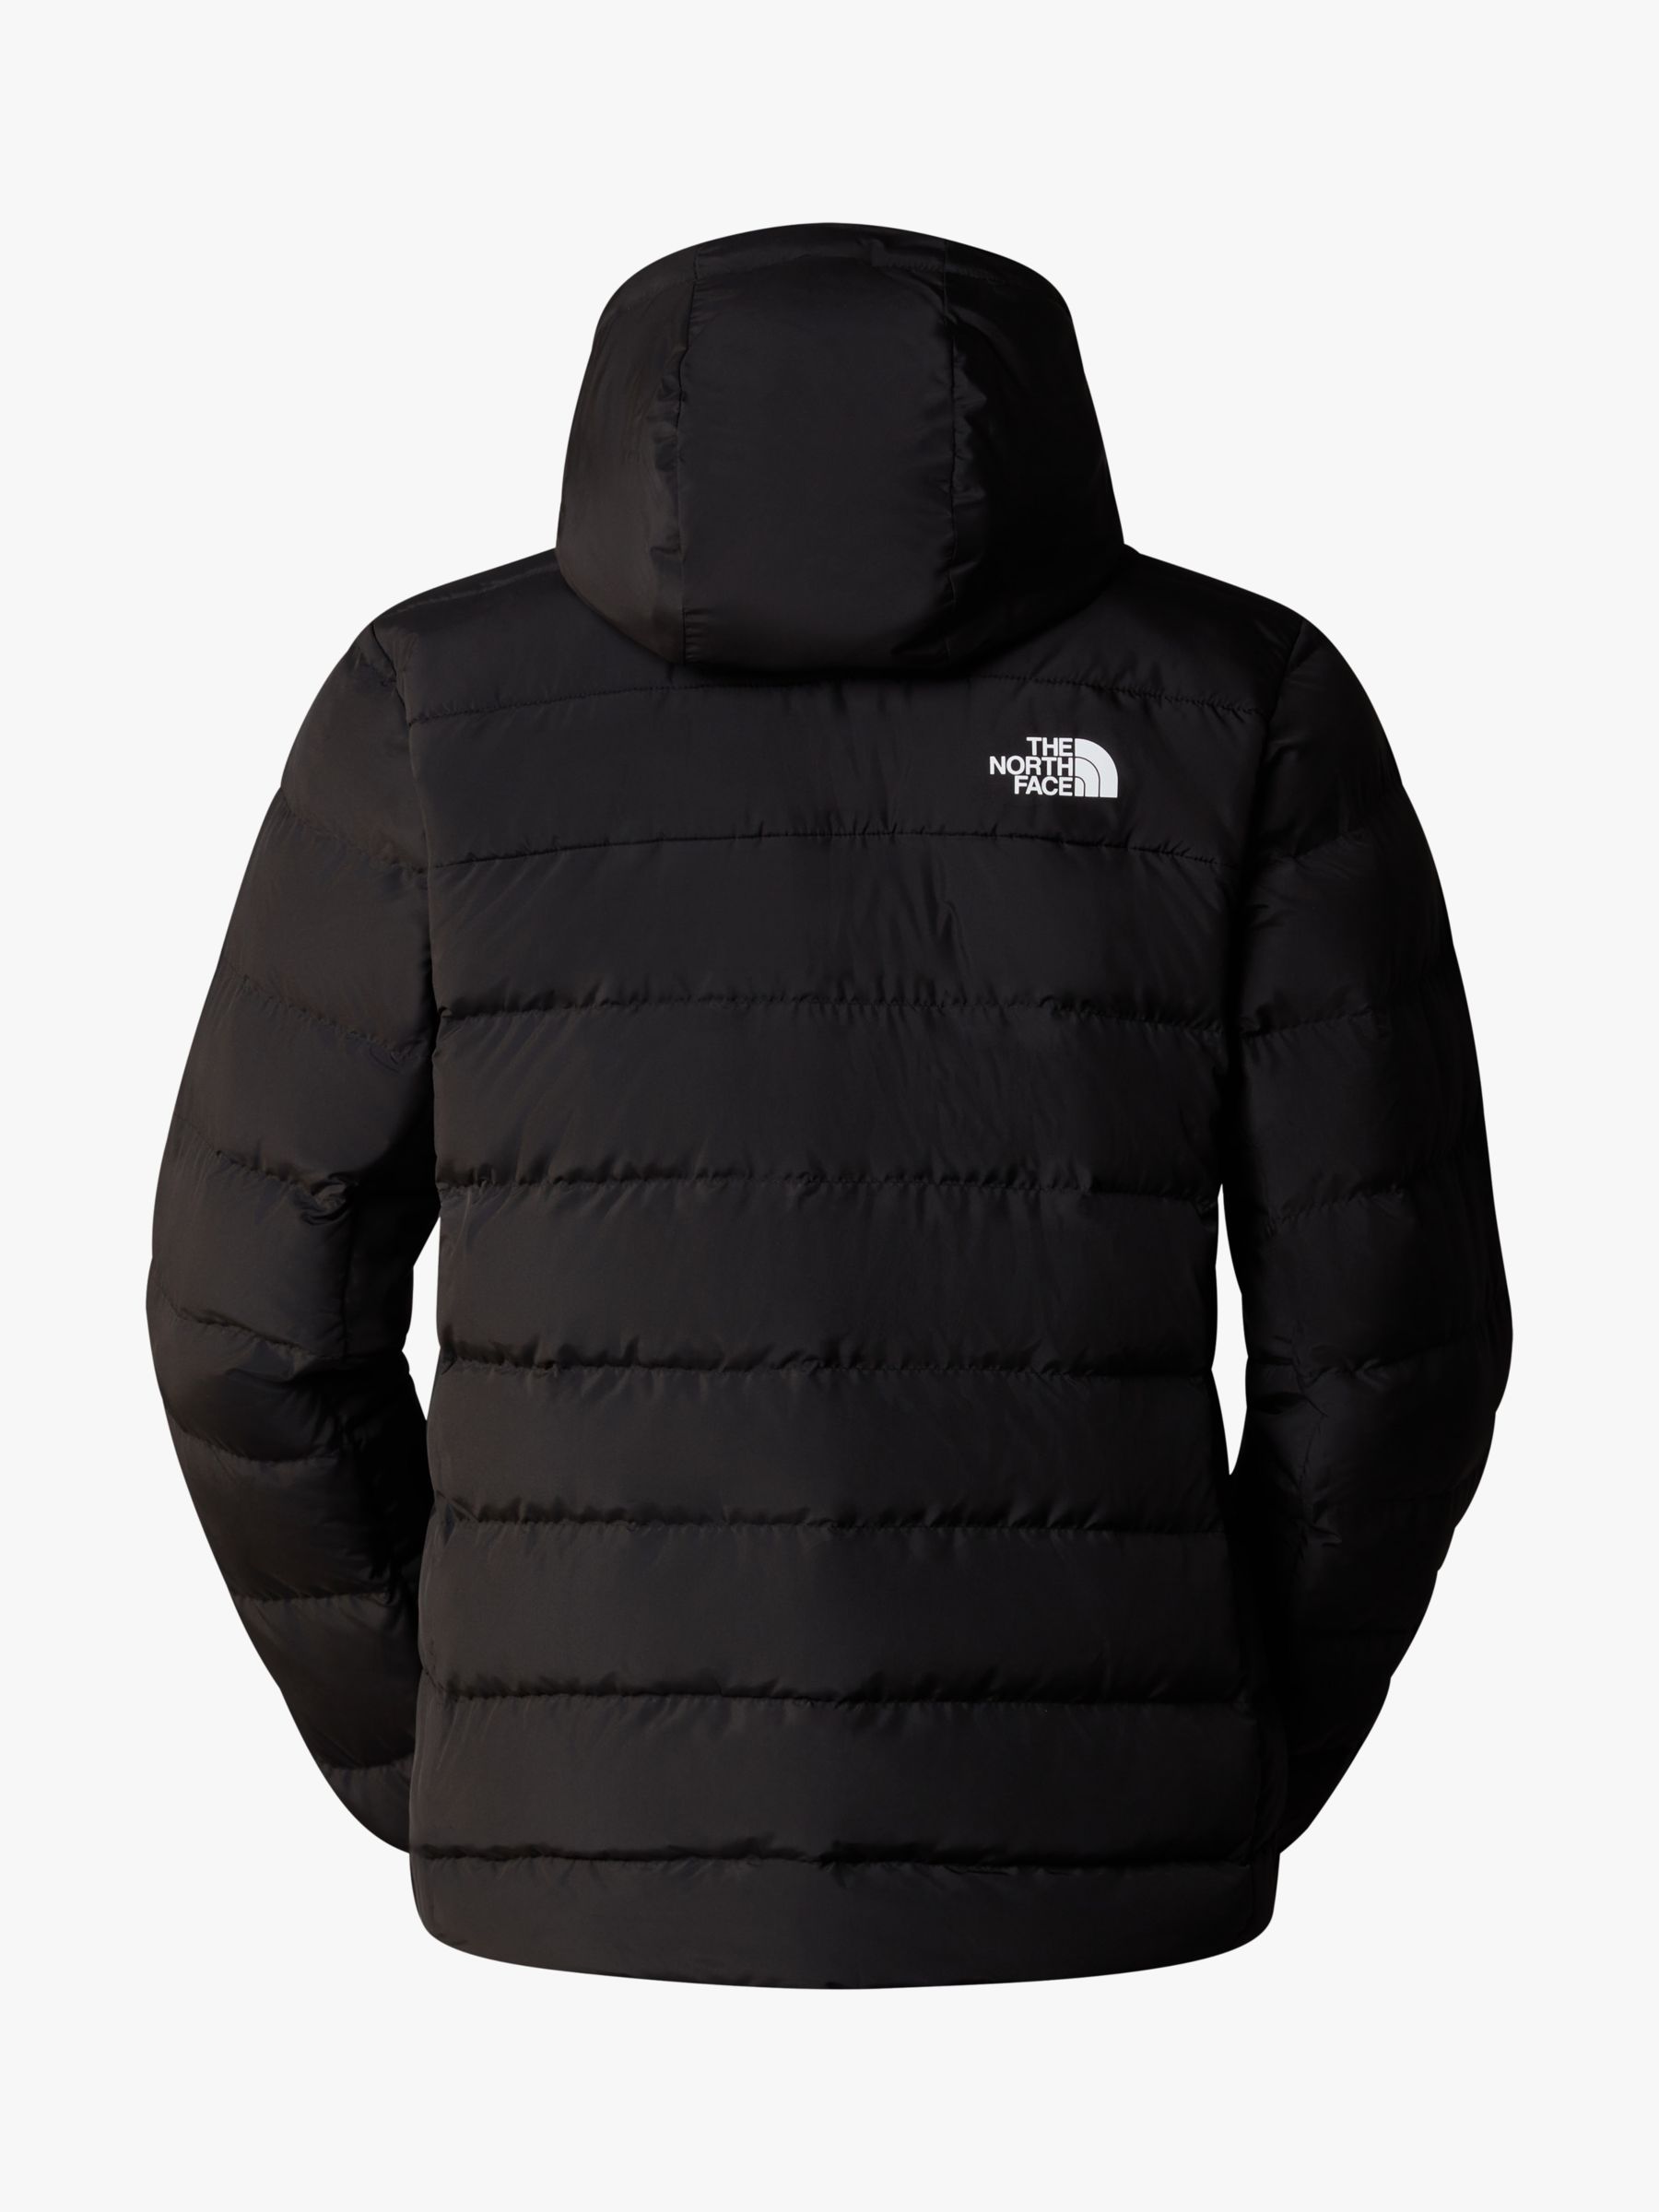 The North Face Aconcagua 3 Men's Down Jacket at John Lewis & Partners